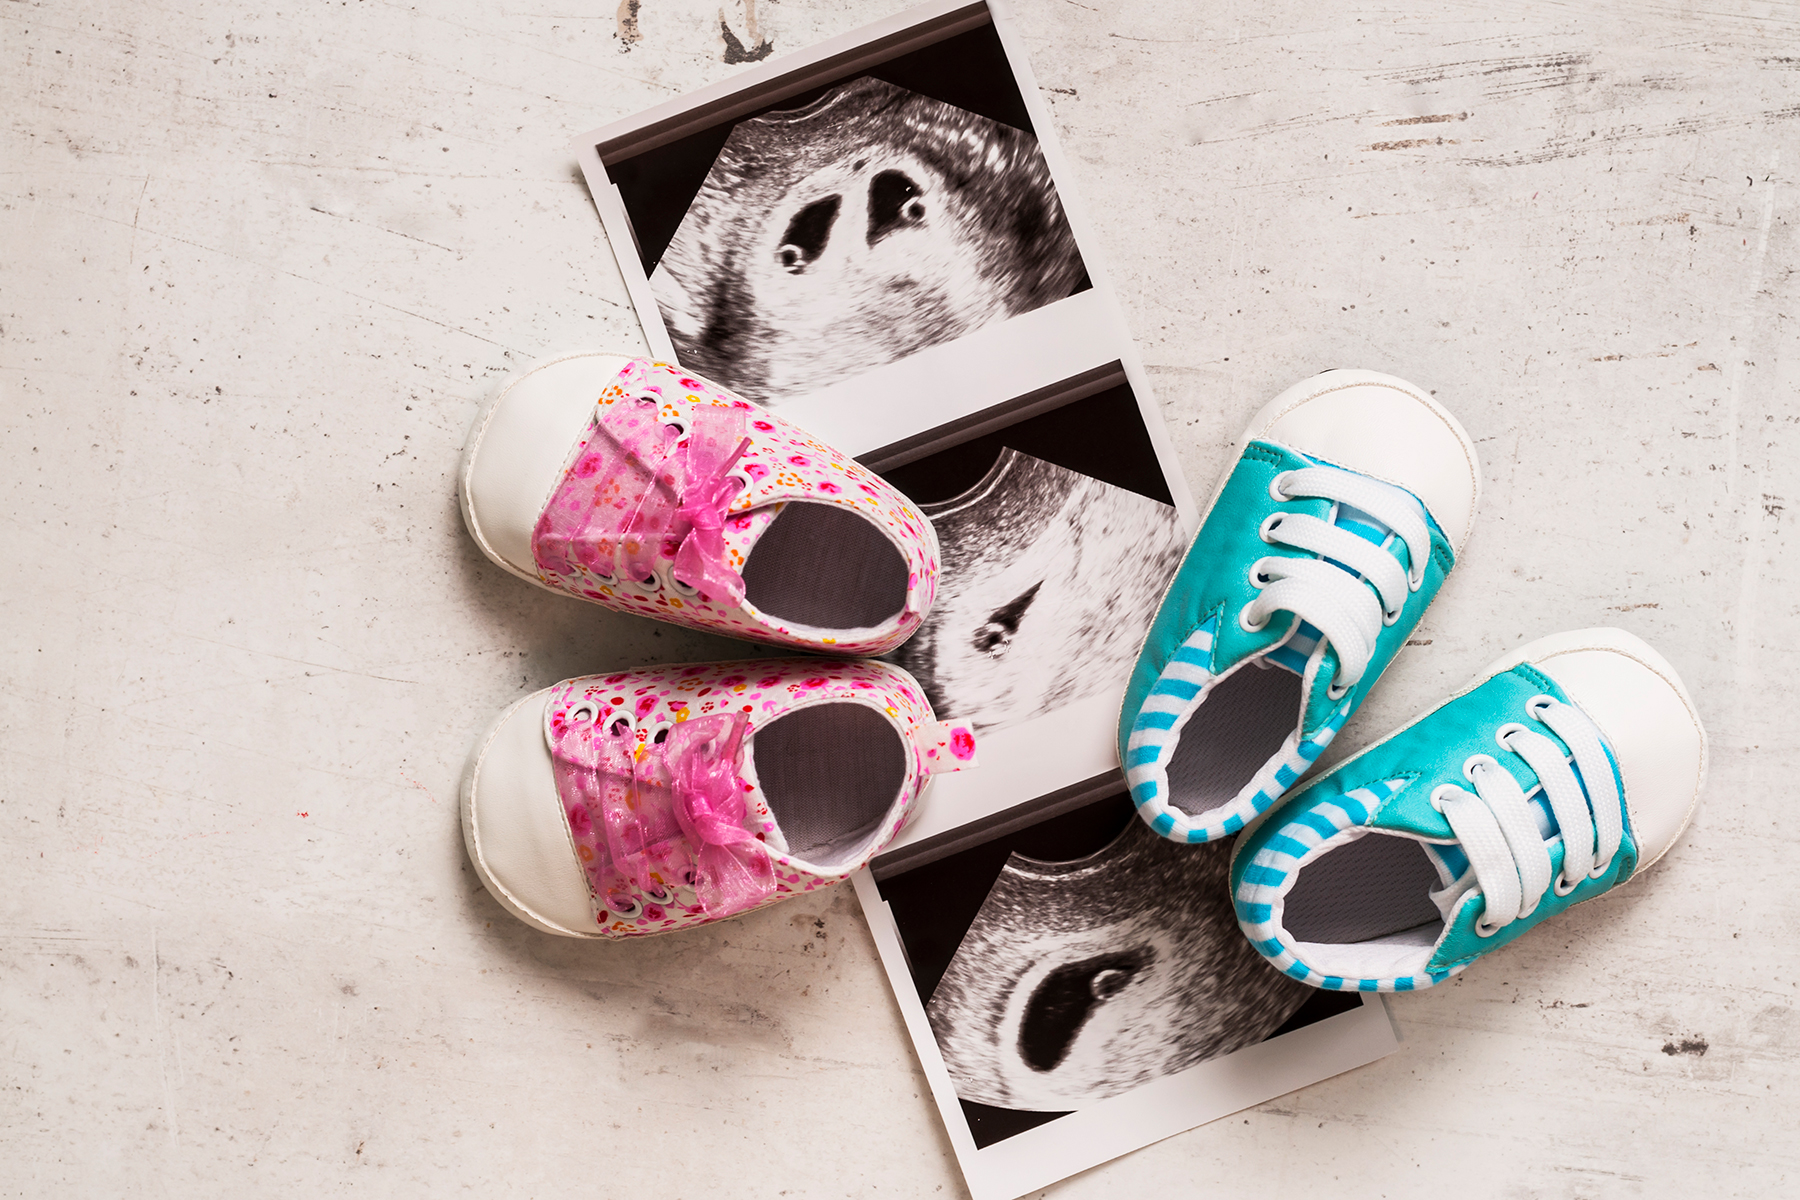 A photo of twin pregnancy scan with pink baby boots and blue baby boots on a marble background.